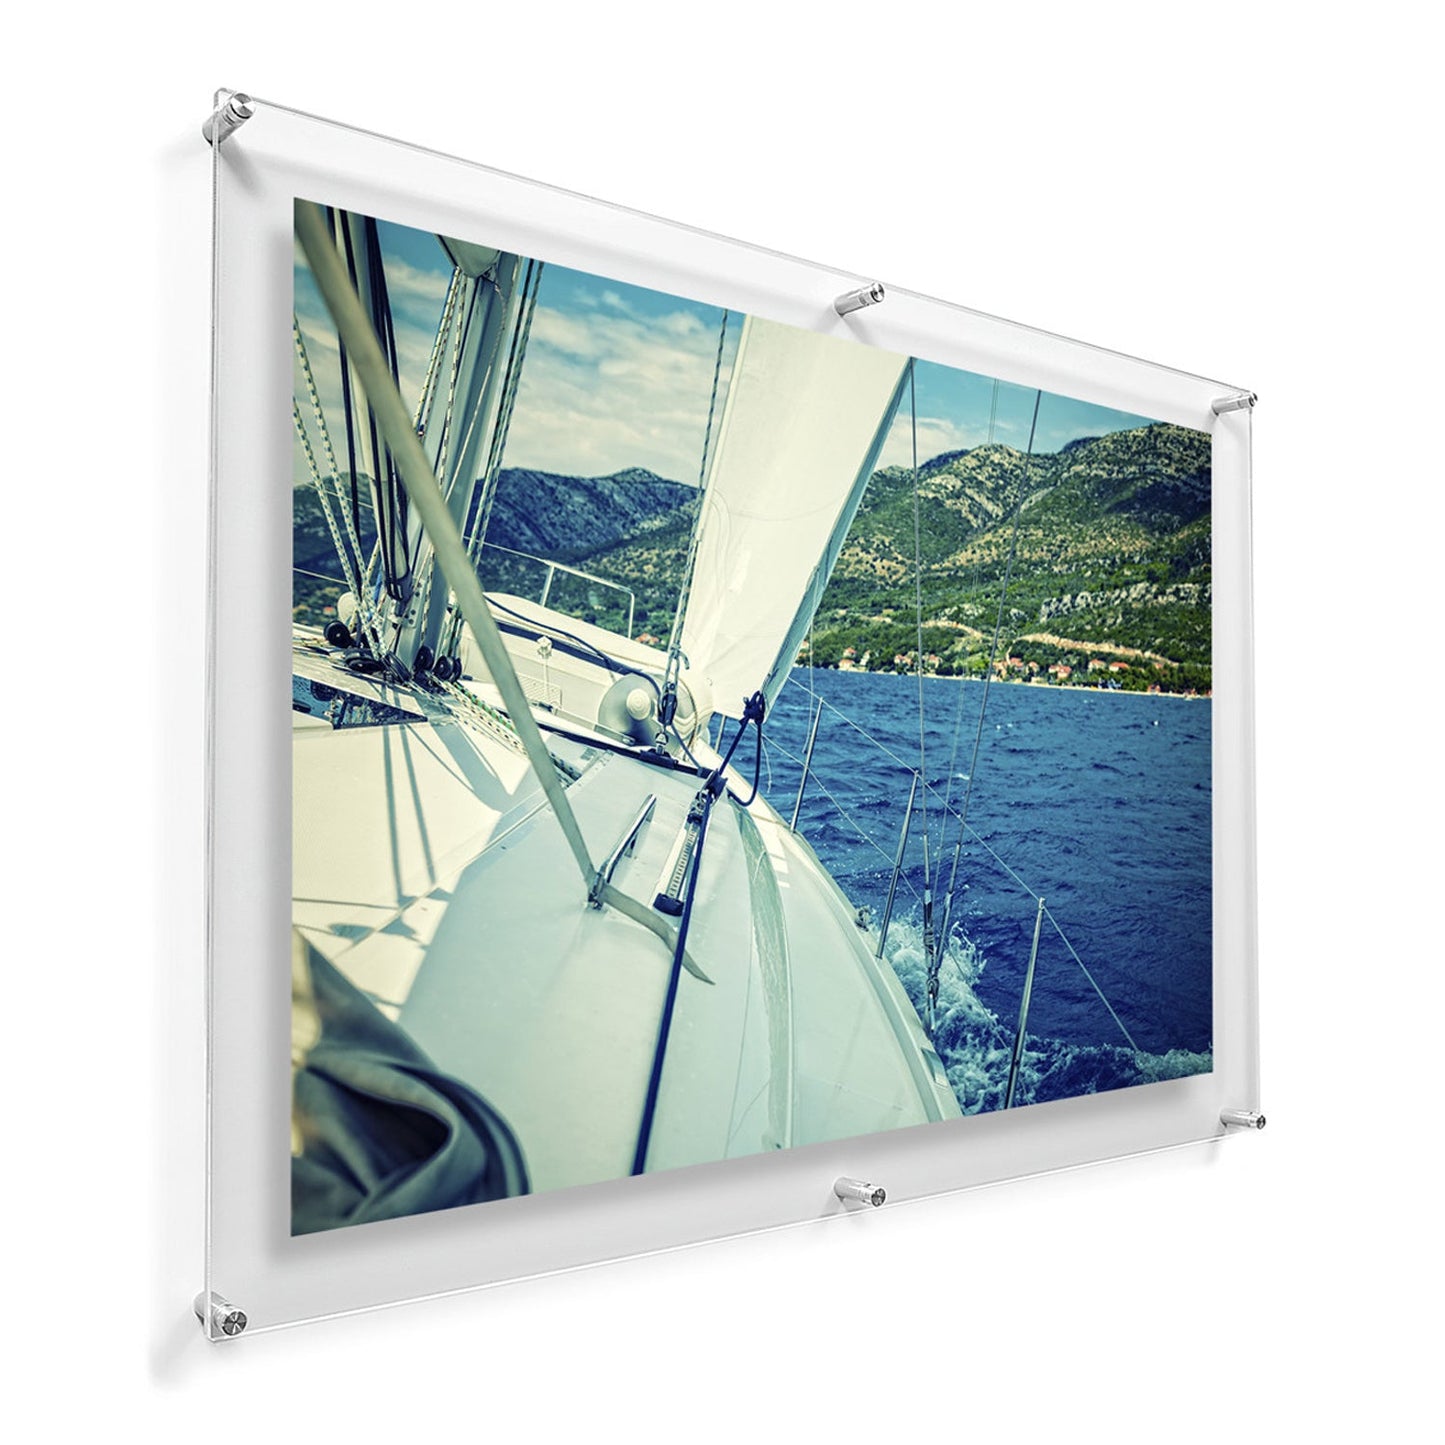 WS Double: 28" x 40" Double Panel Frame